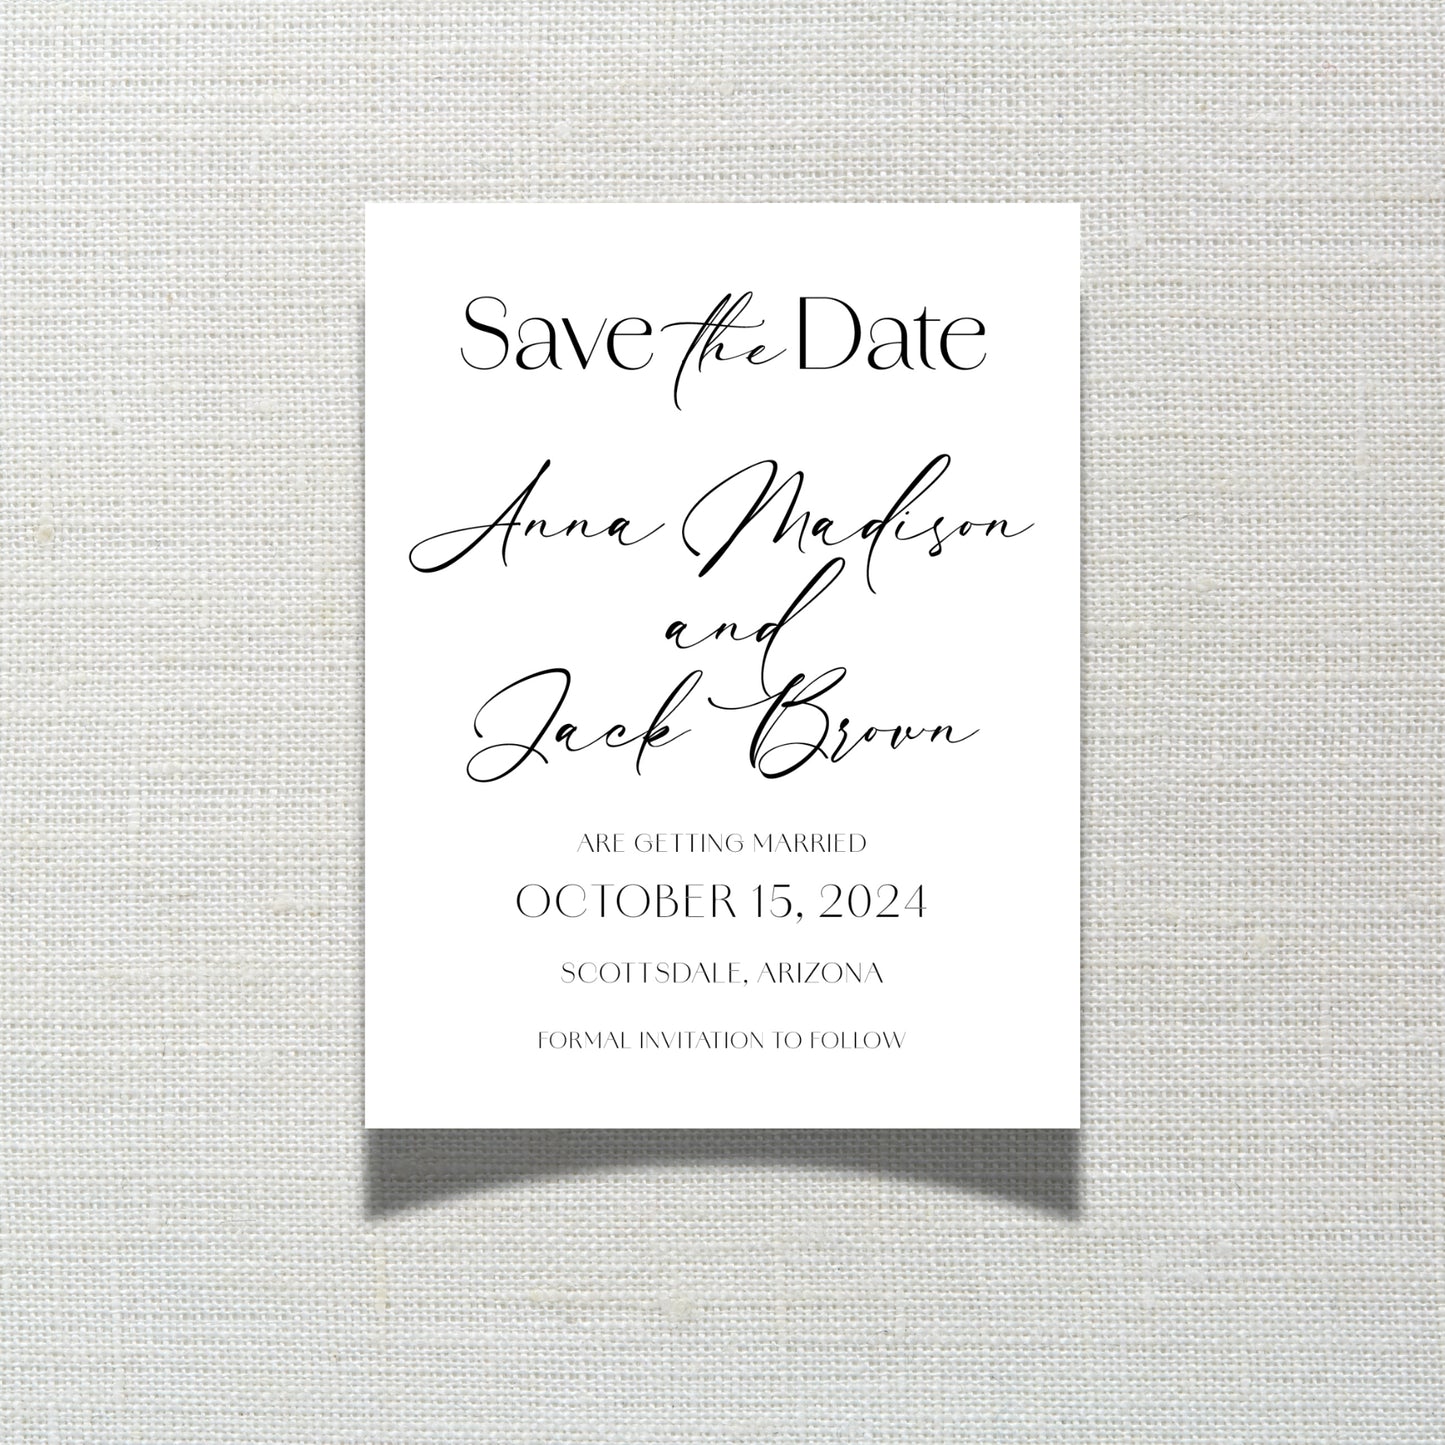 Classic Save The Date Cards for Weddings, Modern Save The Date Cards with Envelopes, 4.25 x 5.5